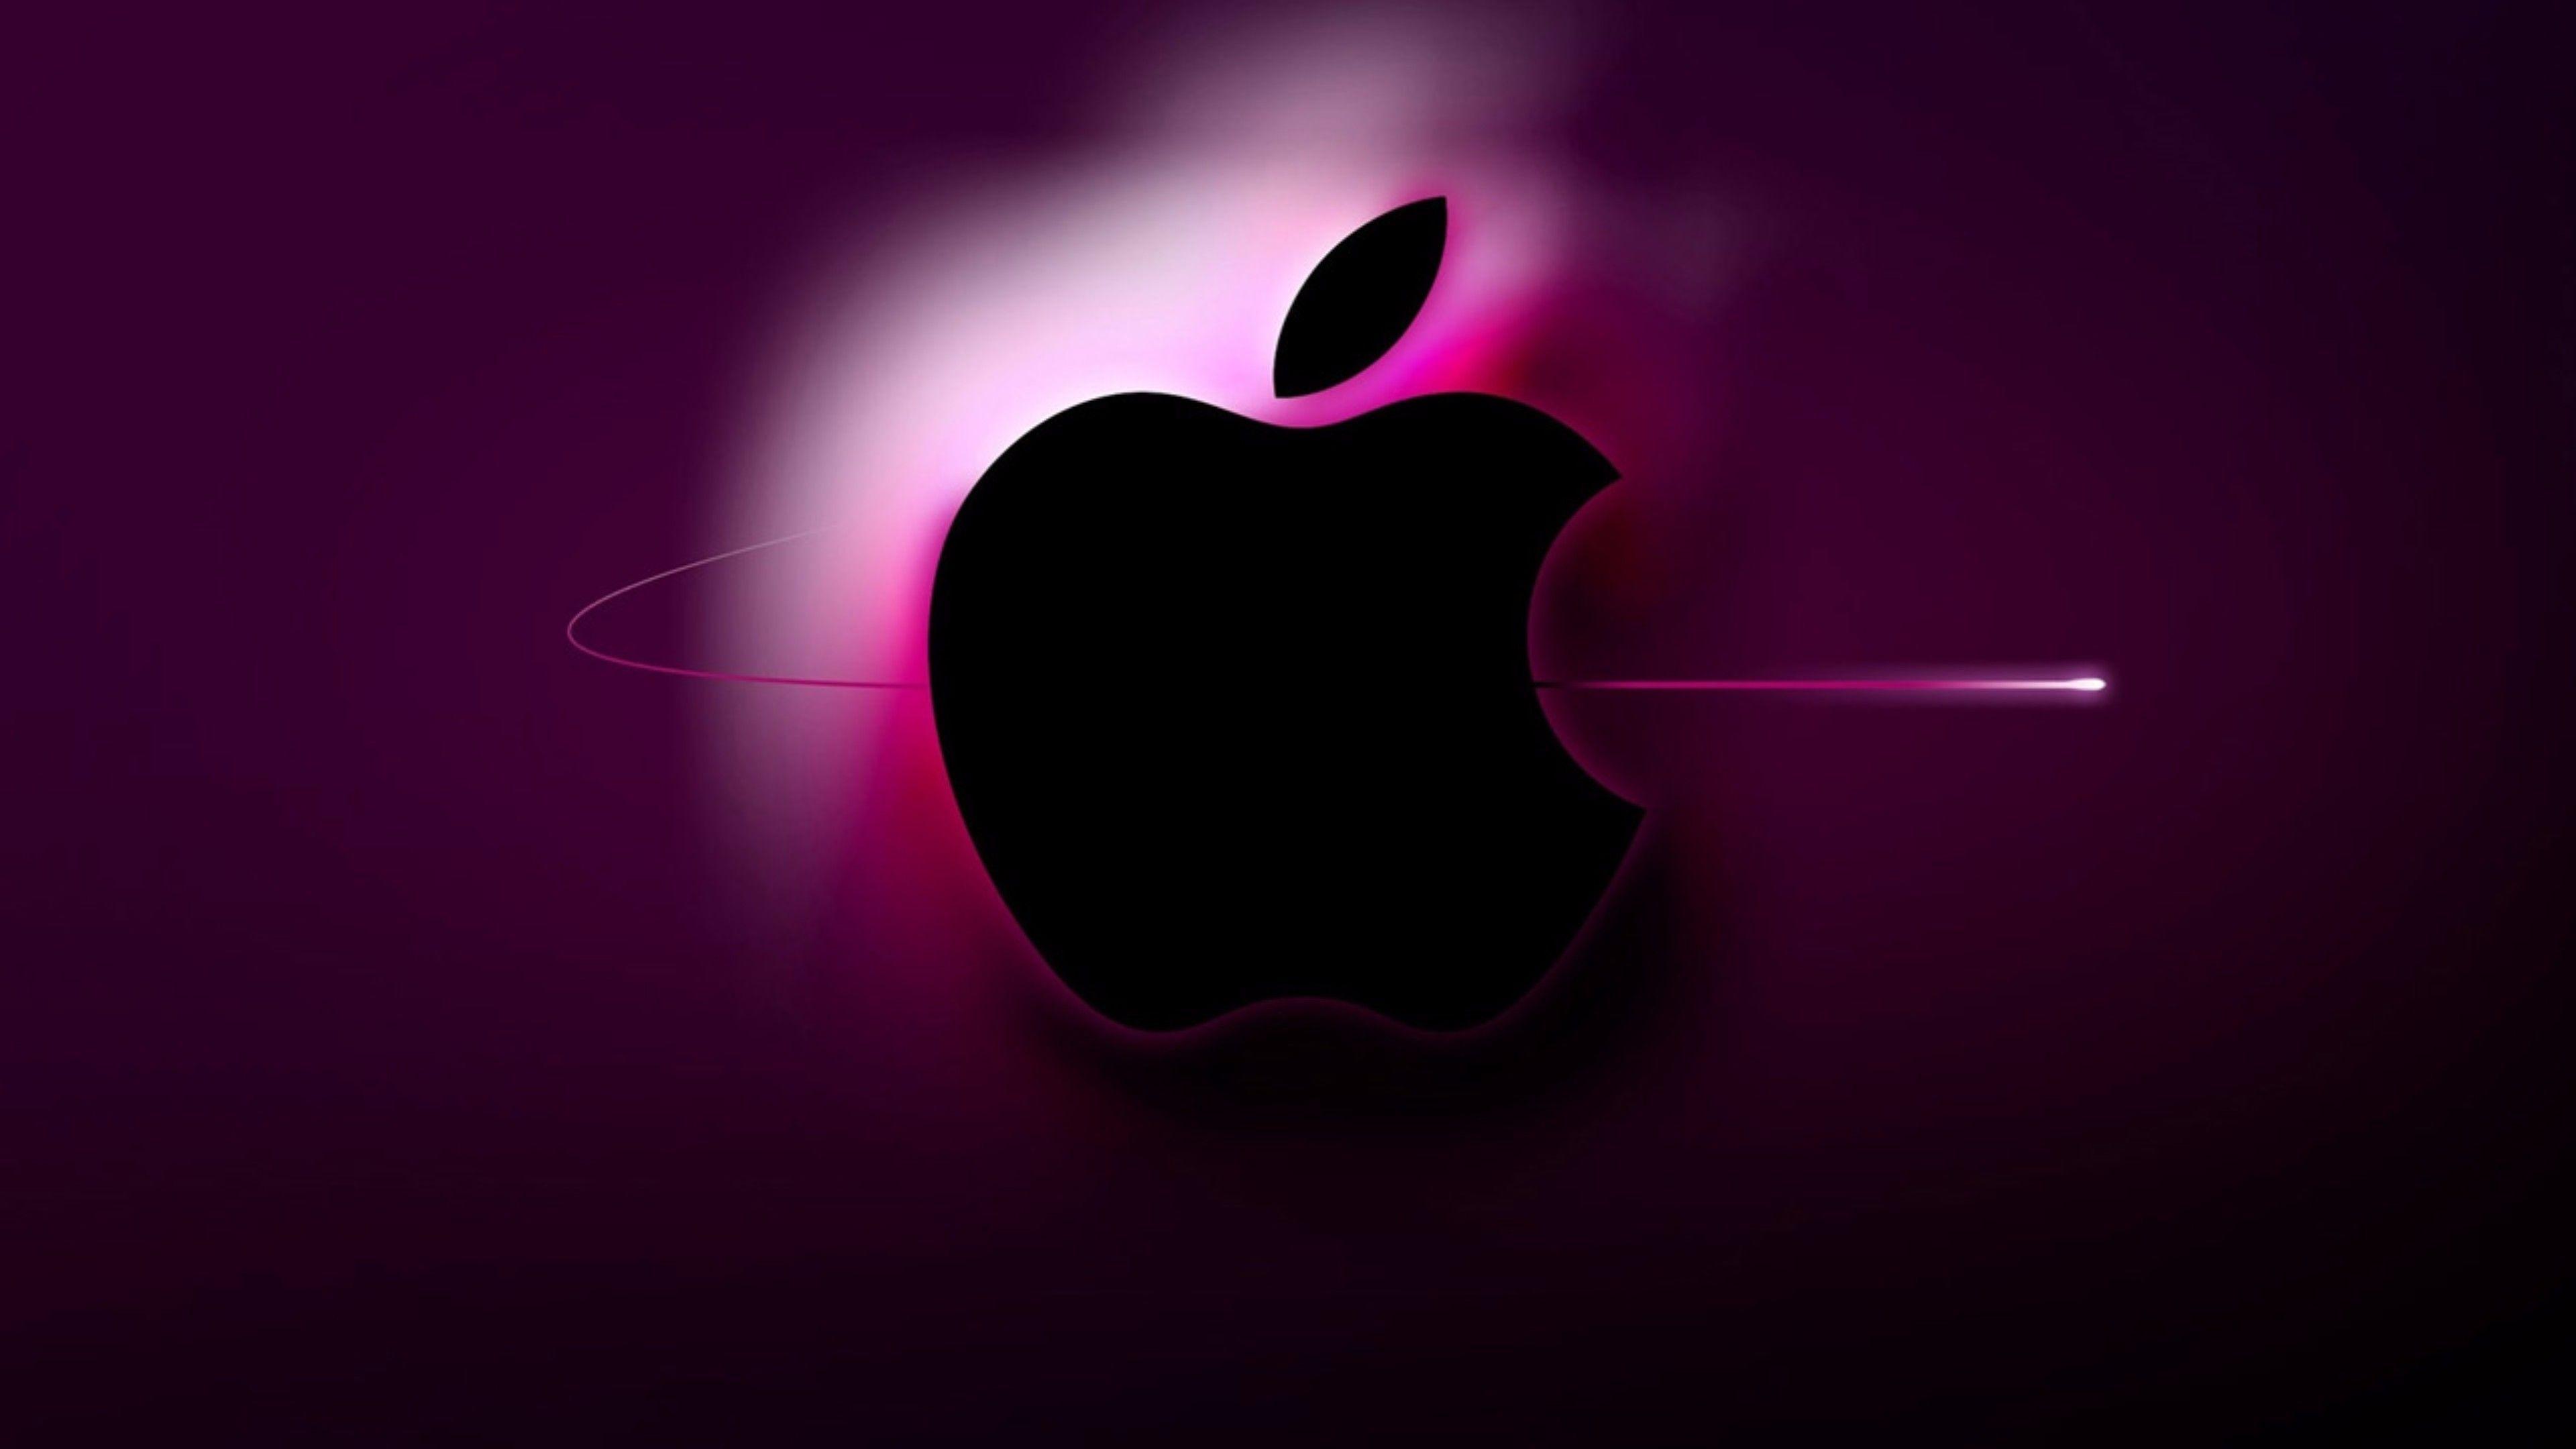 Purple Apple Logo - Apple Logo Wallpapers HD 1080p For Iphone - Wallpaper Cave